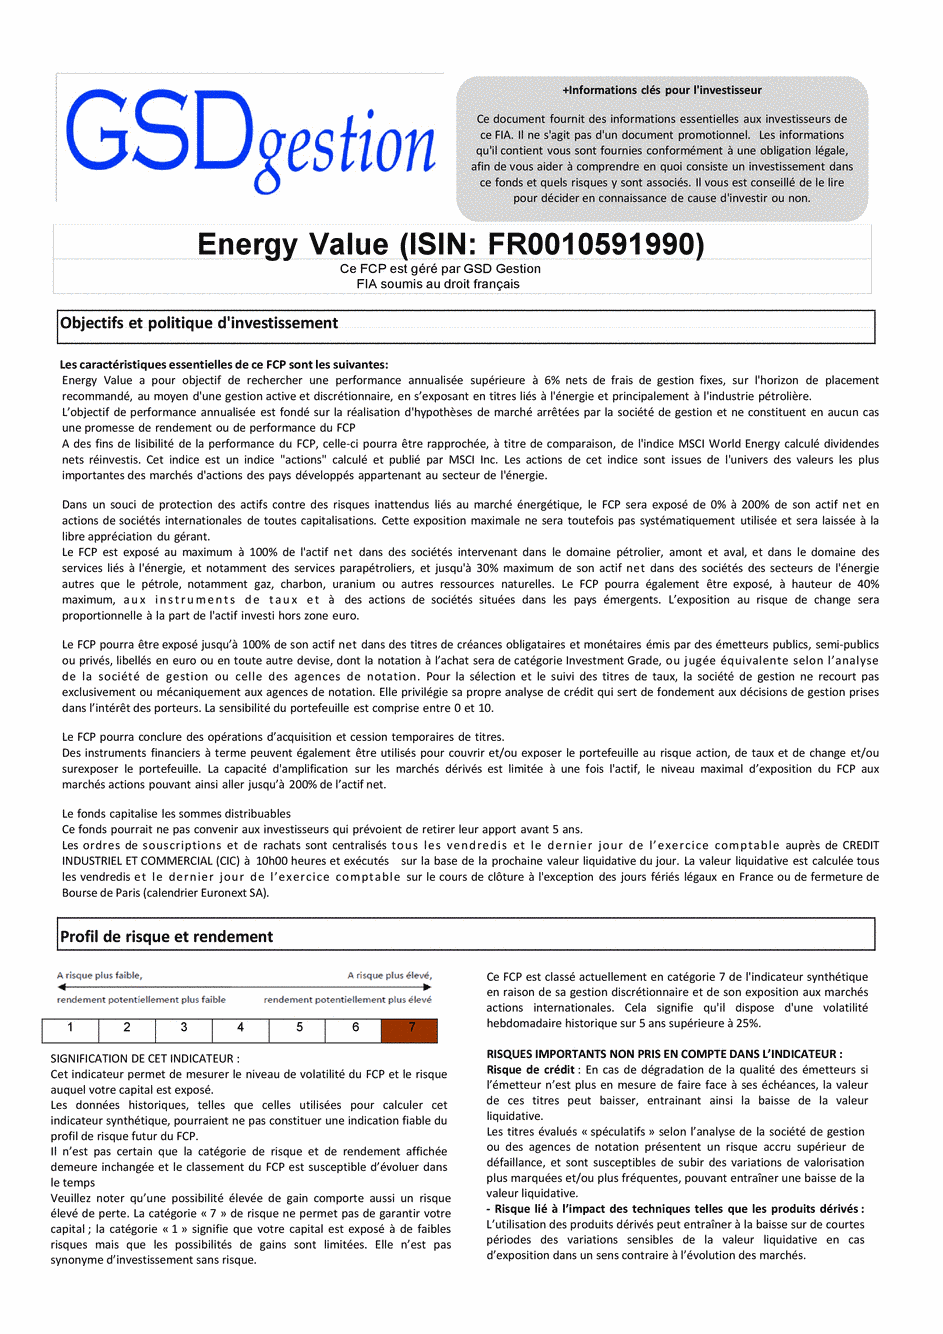 DICI-Prospectus Complet Energy Value - 28/06/2019 - undefined